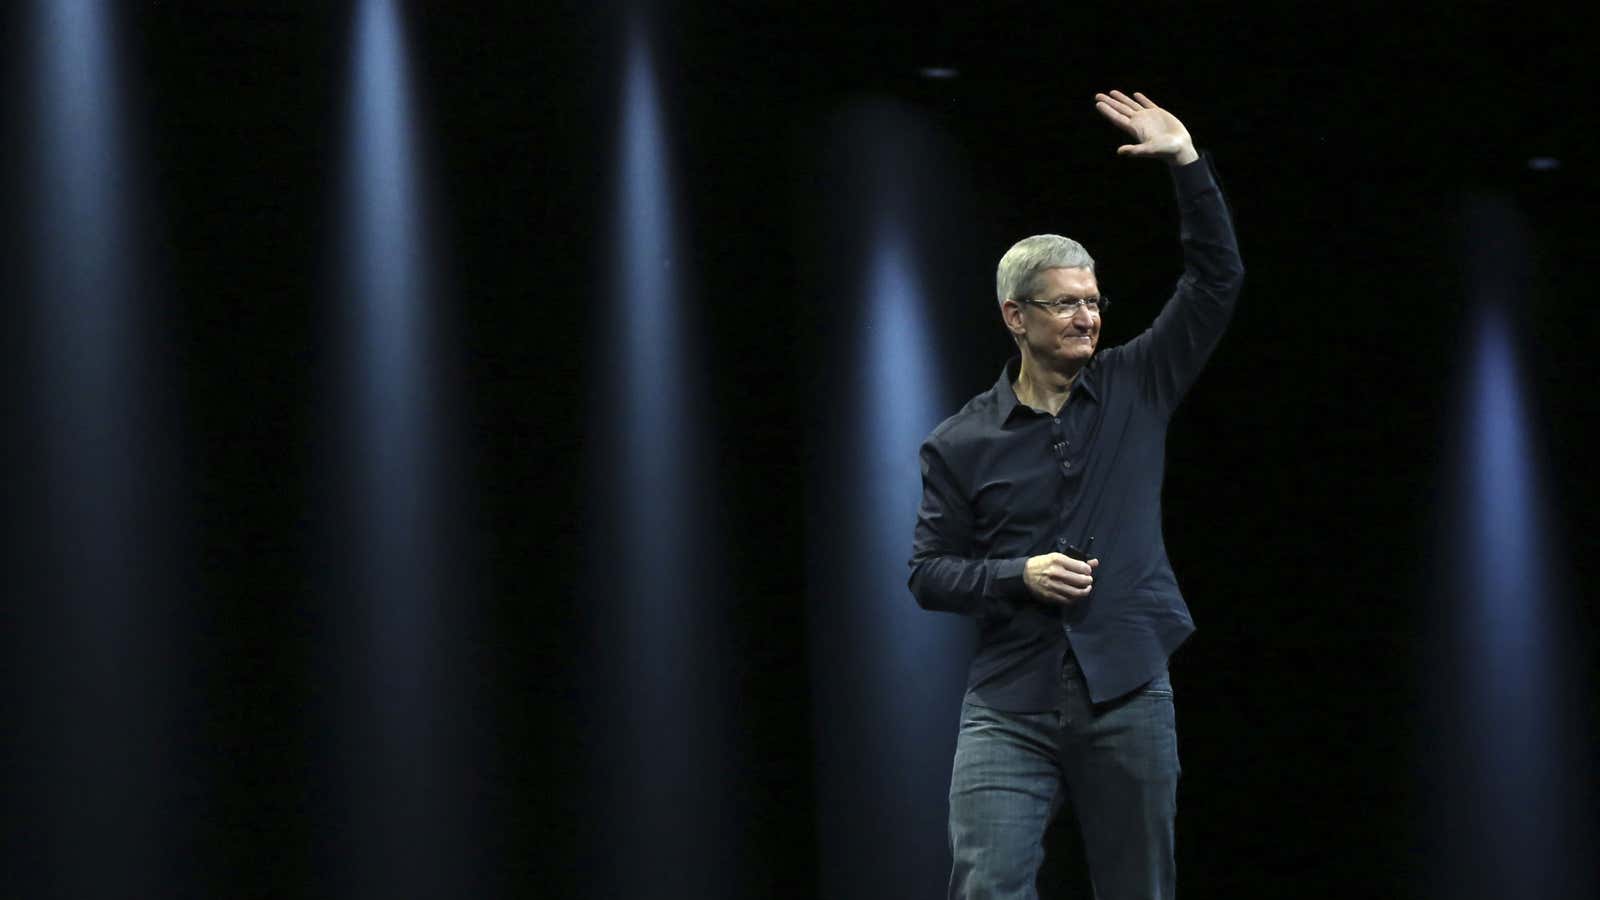 Stepping out of Steve Jobs’ shadow?